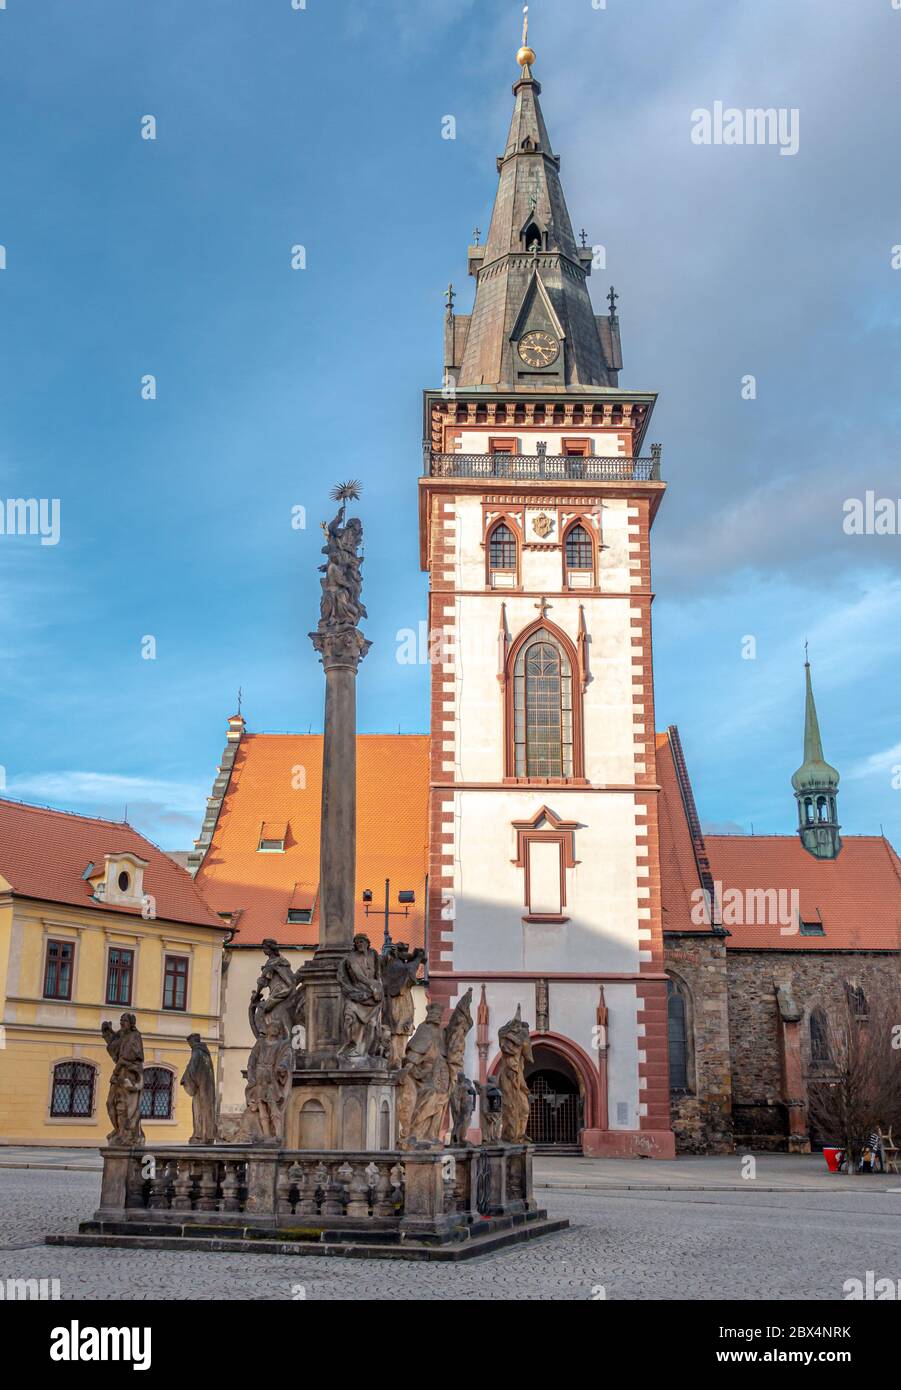 The ancient historical town of Chomutov in Czech Republic Stock Photo